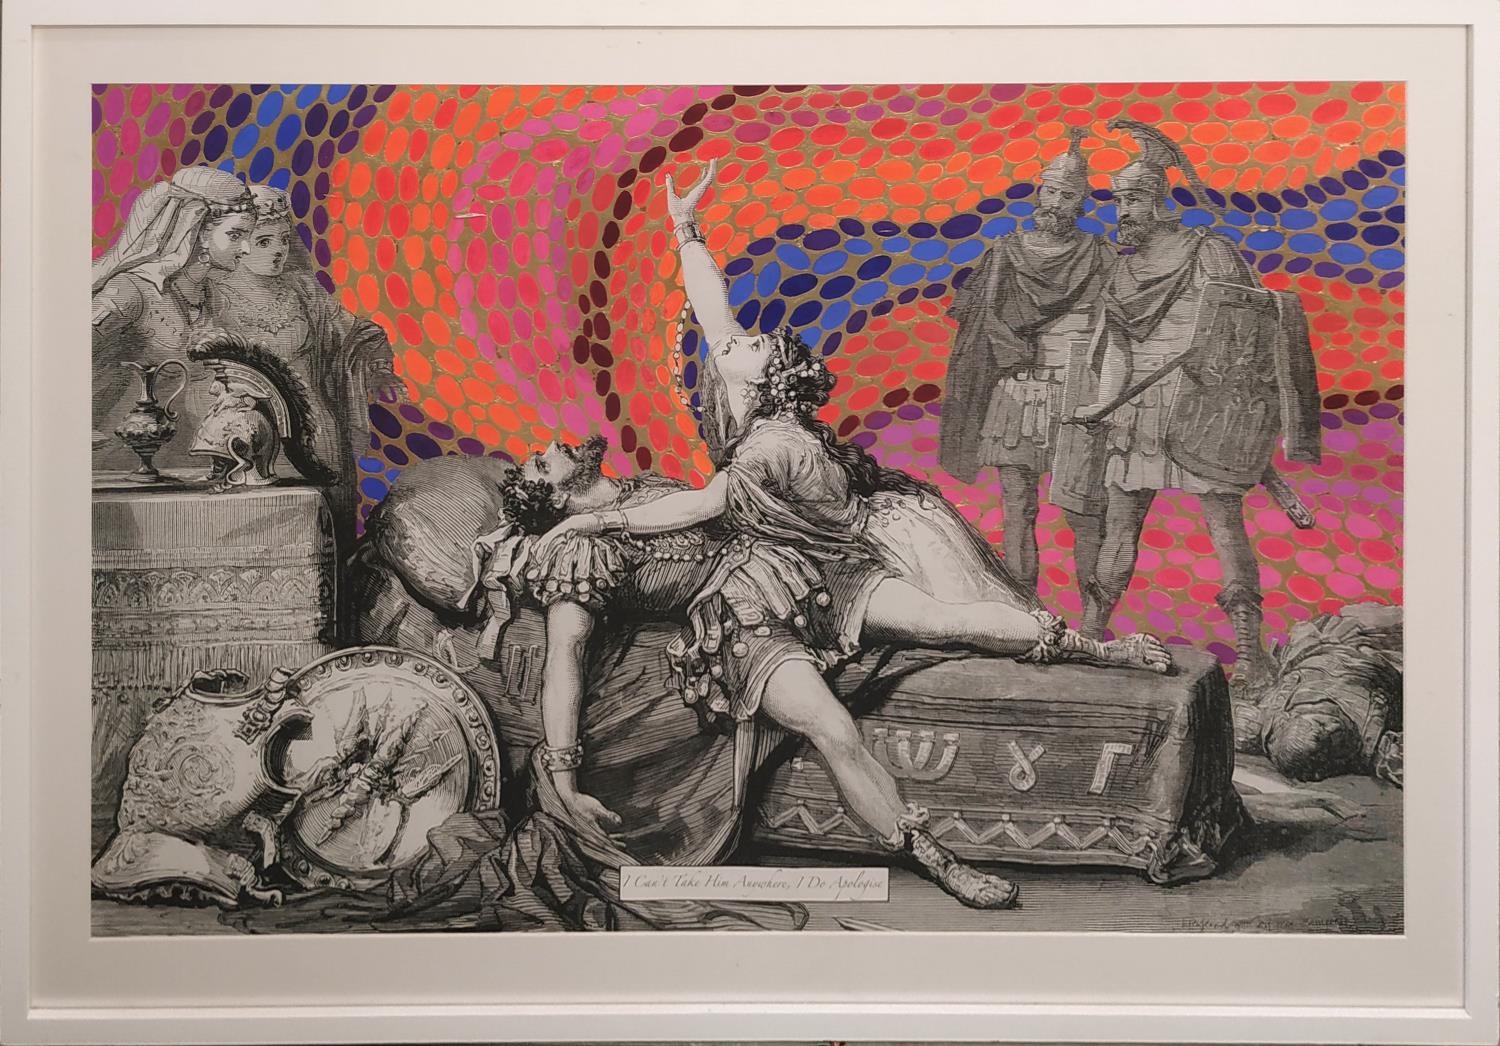 LADY LIZA CAMPBELL (1959) 'I can't take him anywhere', ink gouache and acrylic on engraving, 76cm